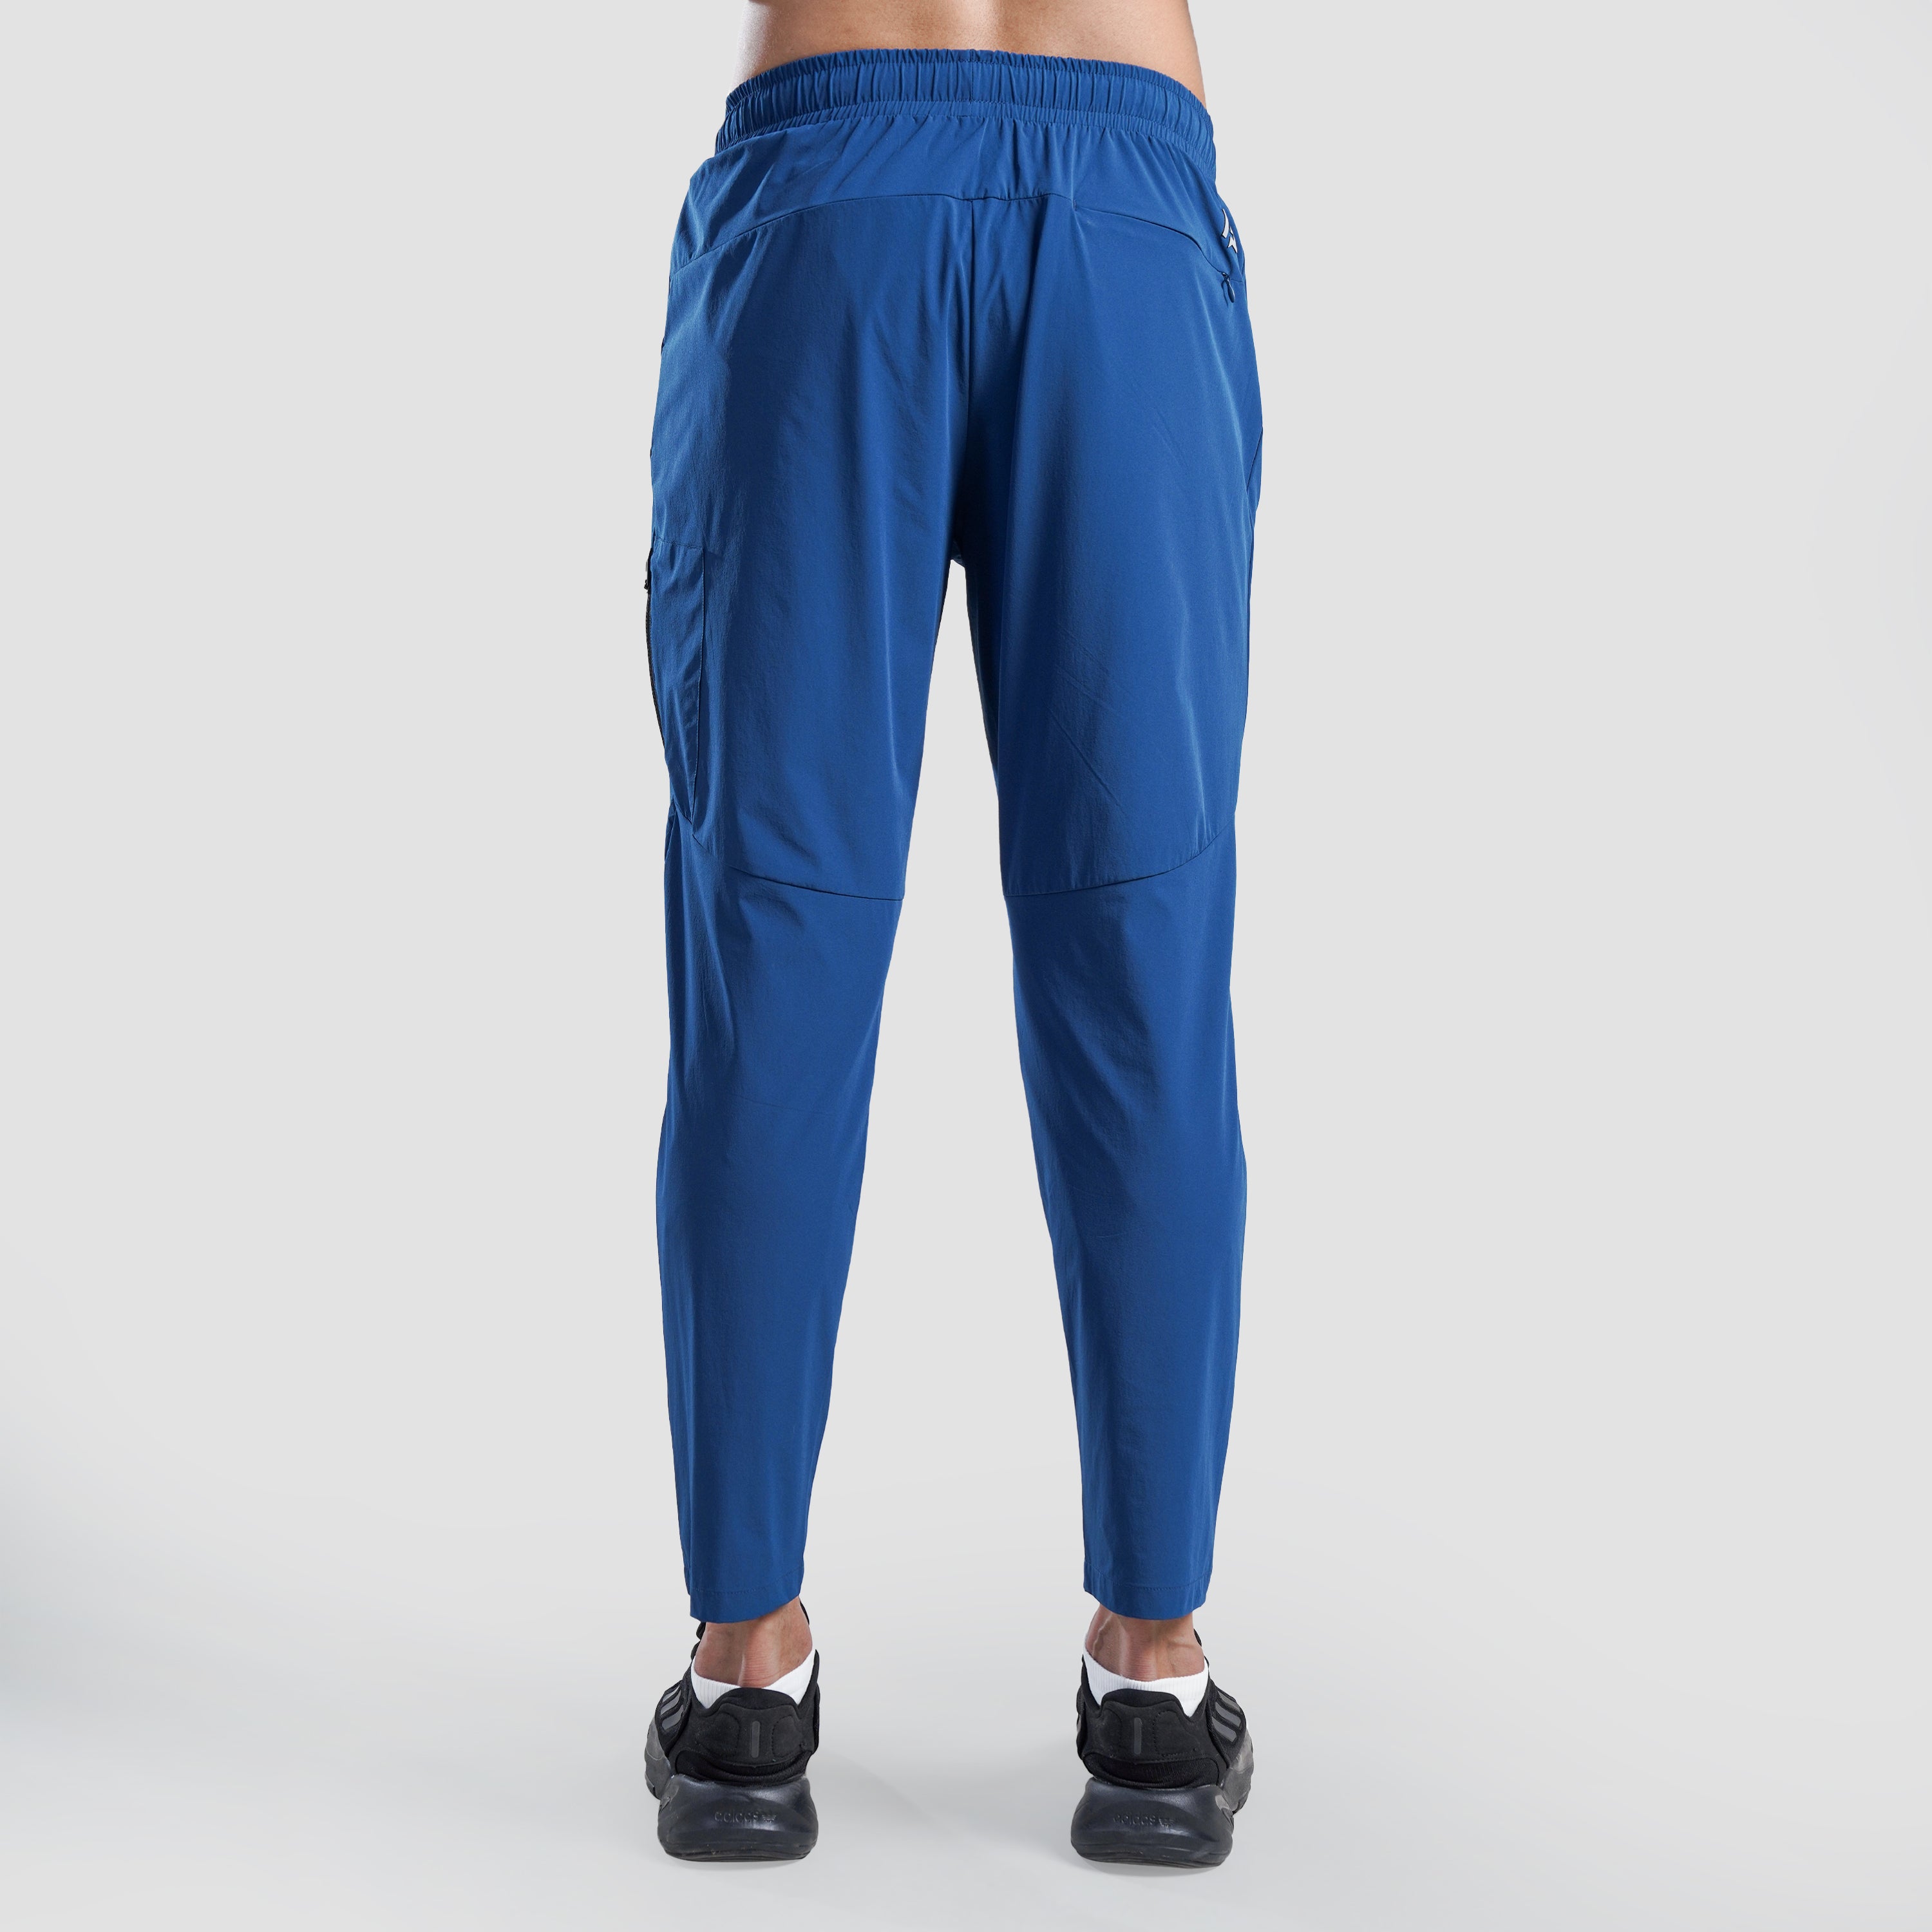 Performance Trousers (Teal)